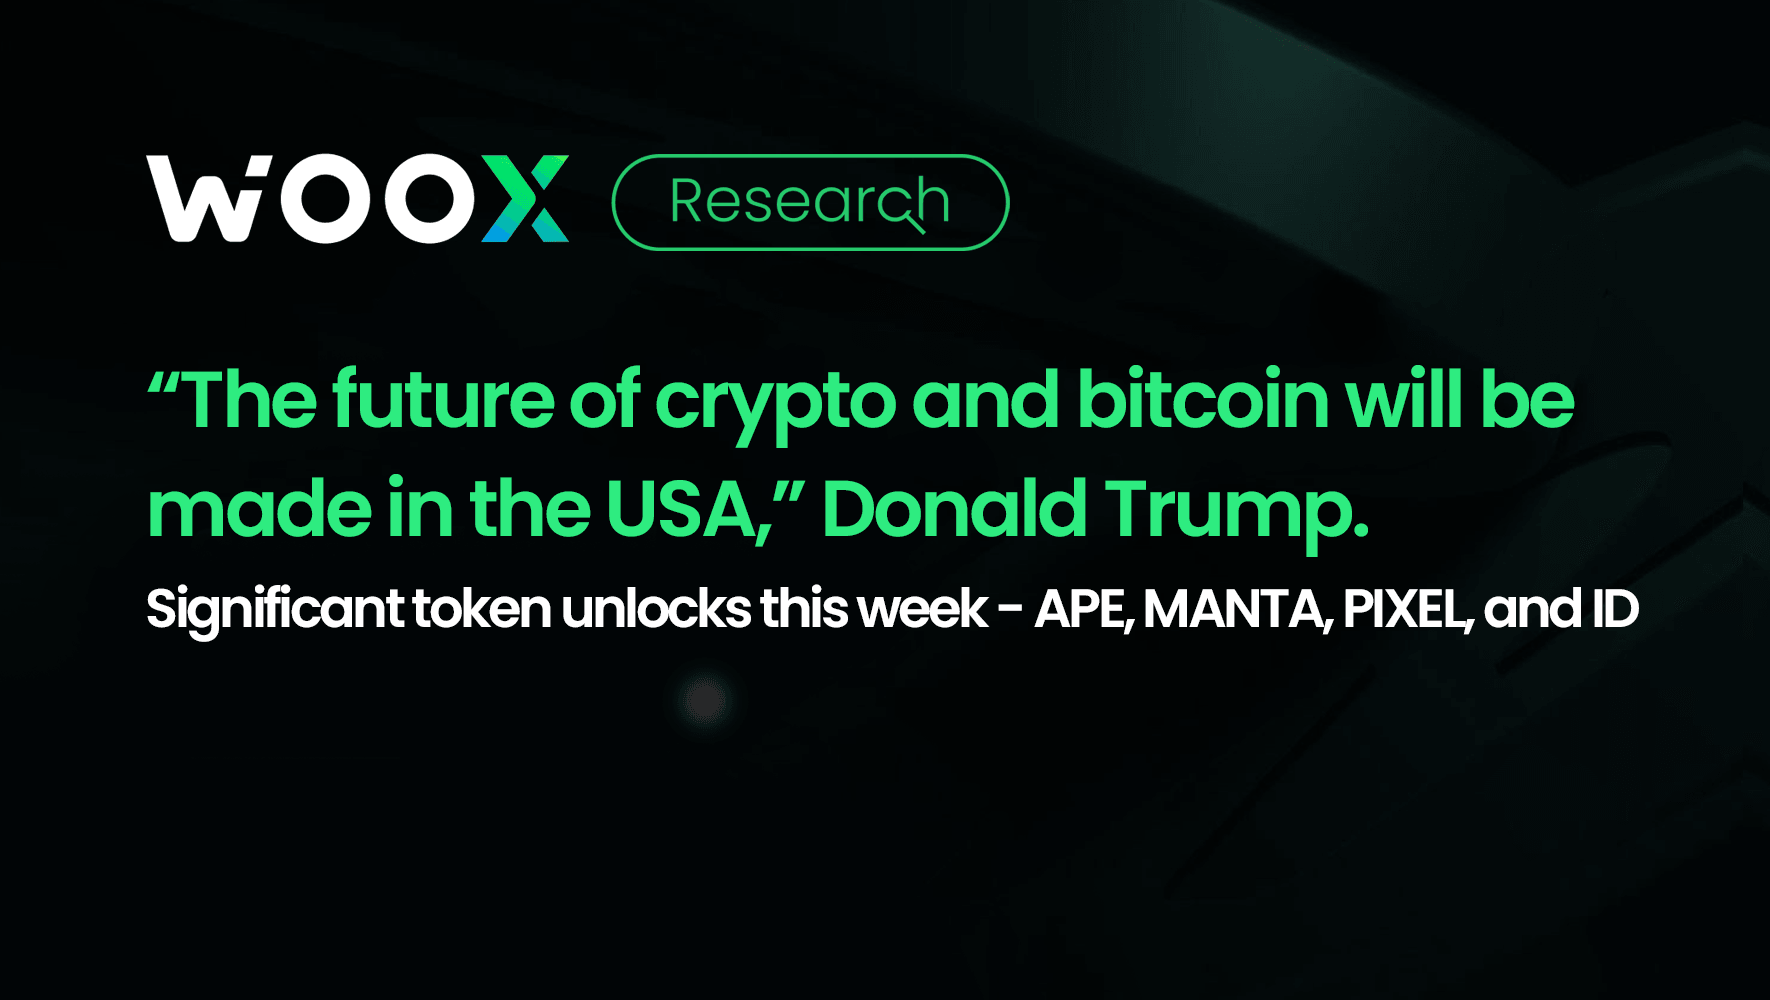 The future of crypto and bitcoin will be made in the USA